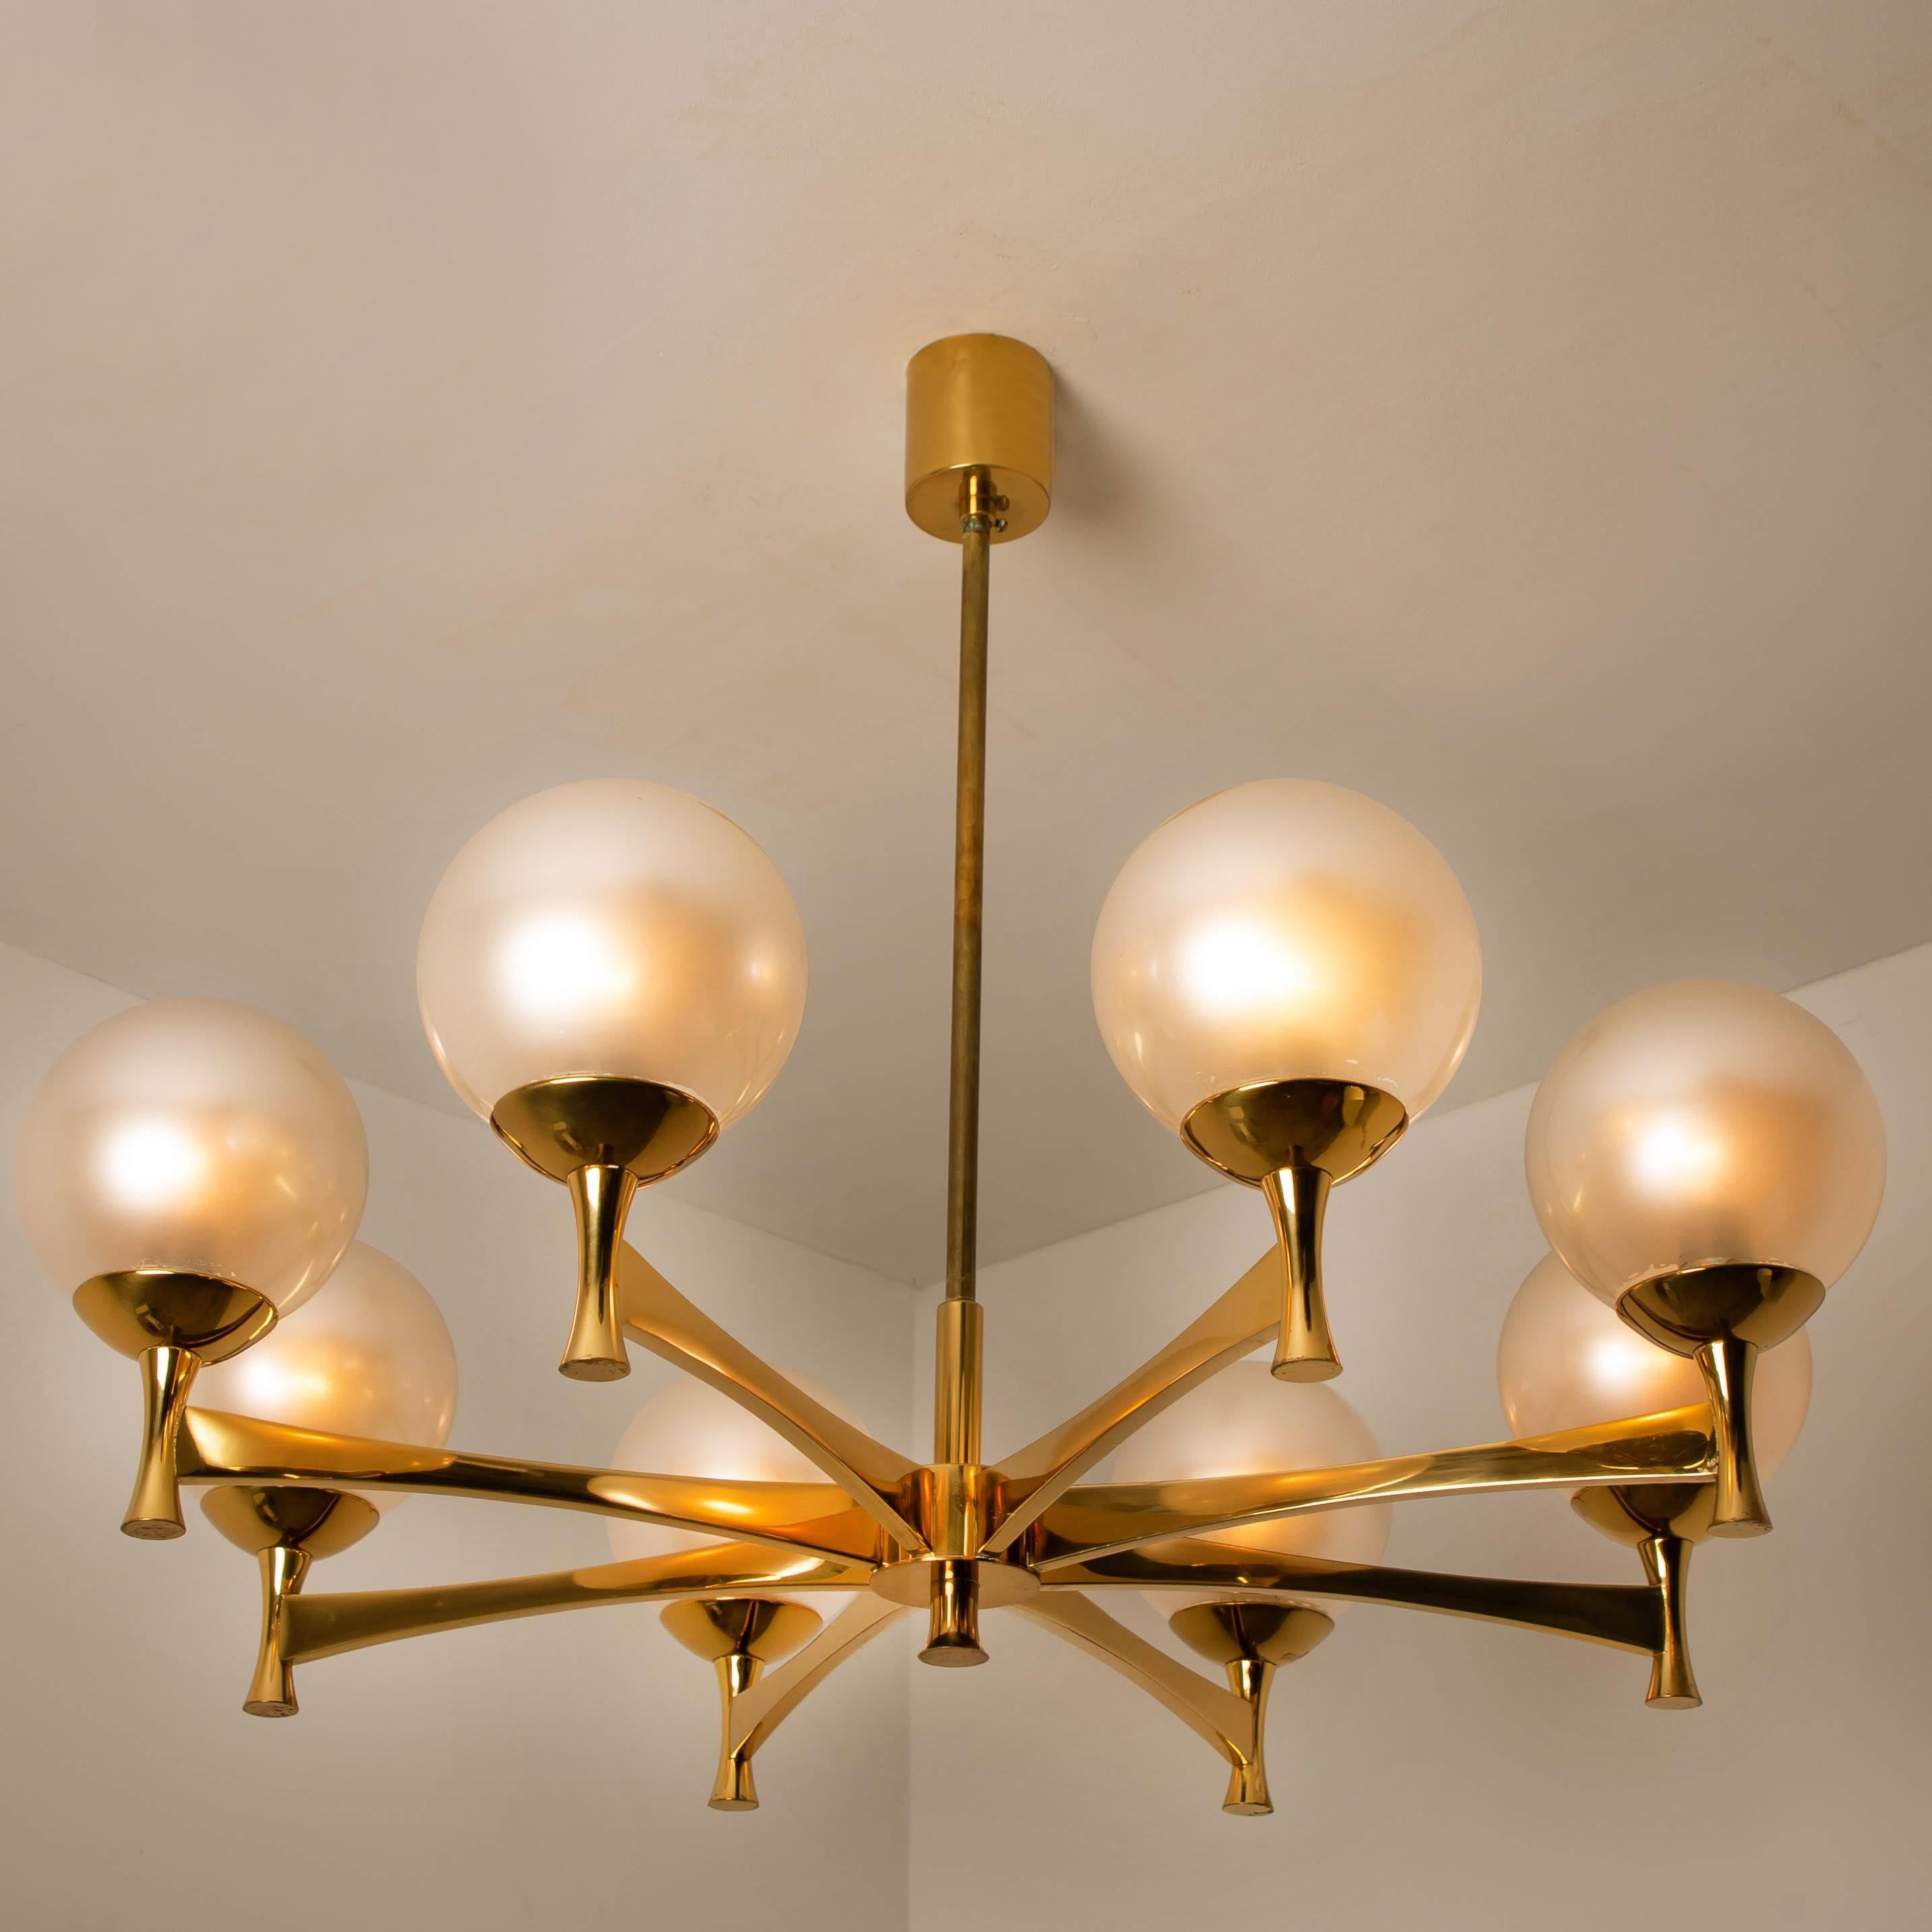 Chandelier in brass and opaline glass, Europe, 1960s.

The chandelier consists 8 brass holders with 8 opaline glass spheres. Due the combination of materials these lights will create a beautiful warm and diffuse lights. Designed in the style of